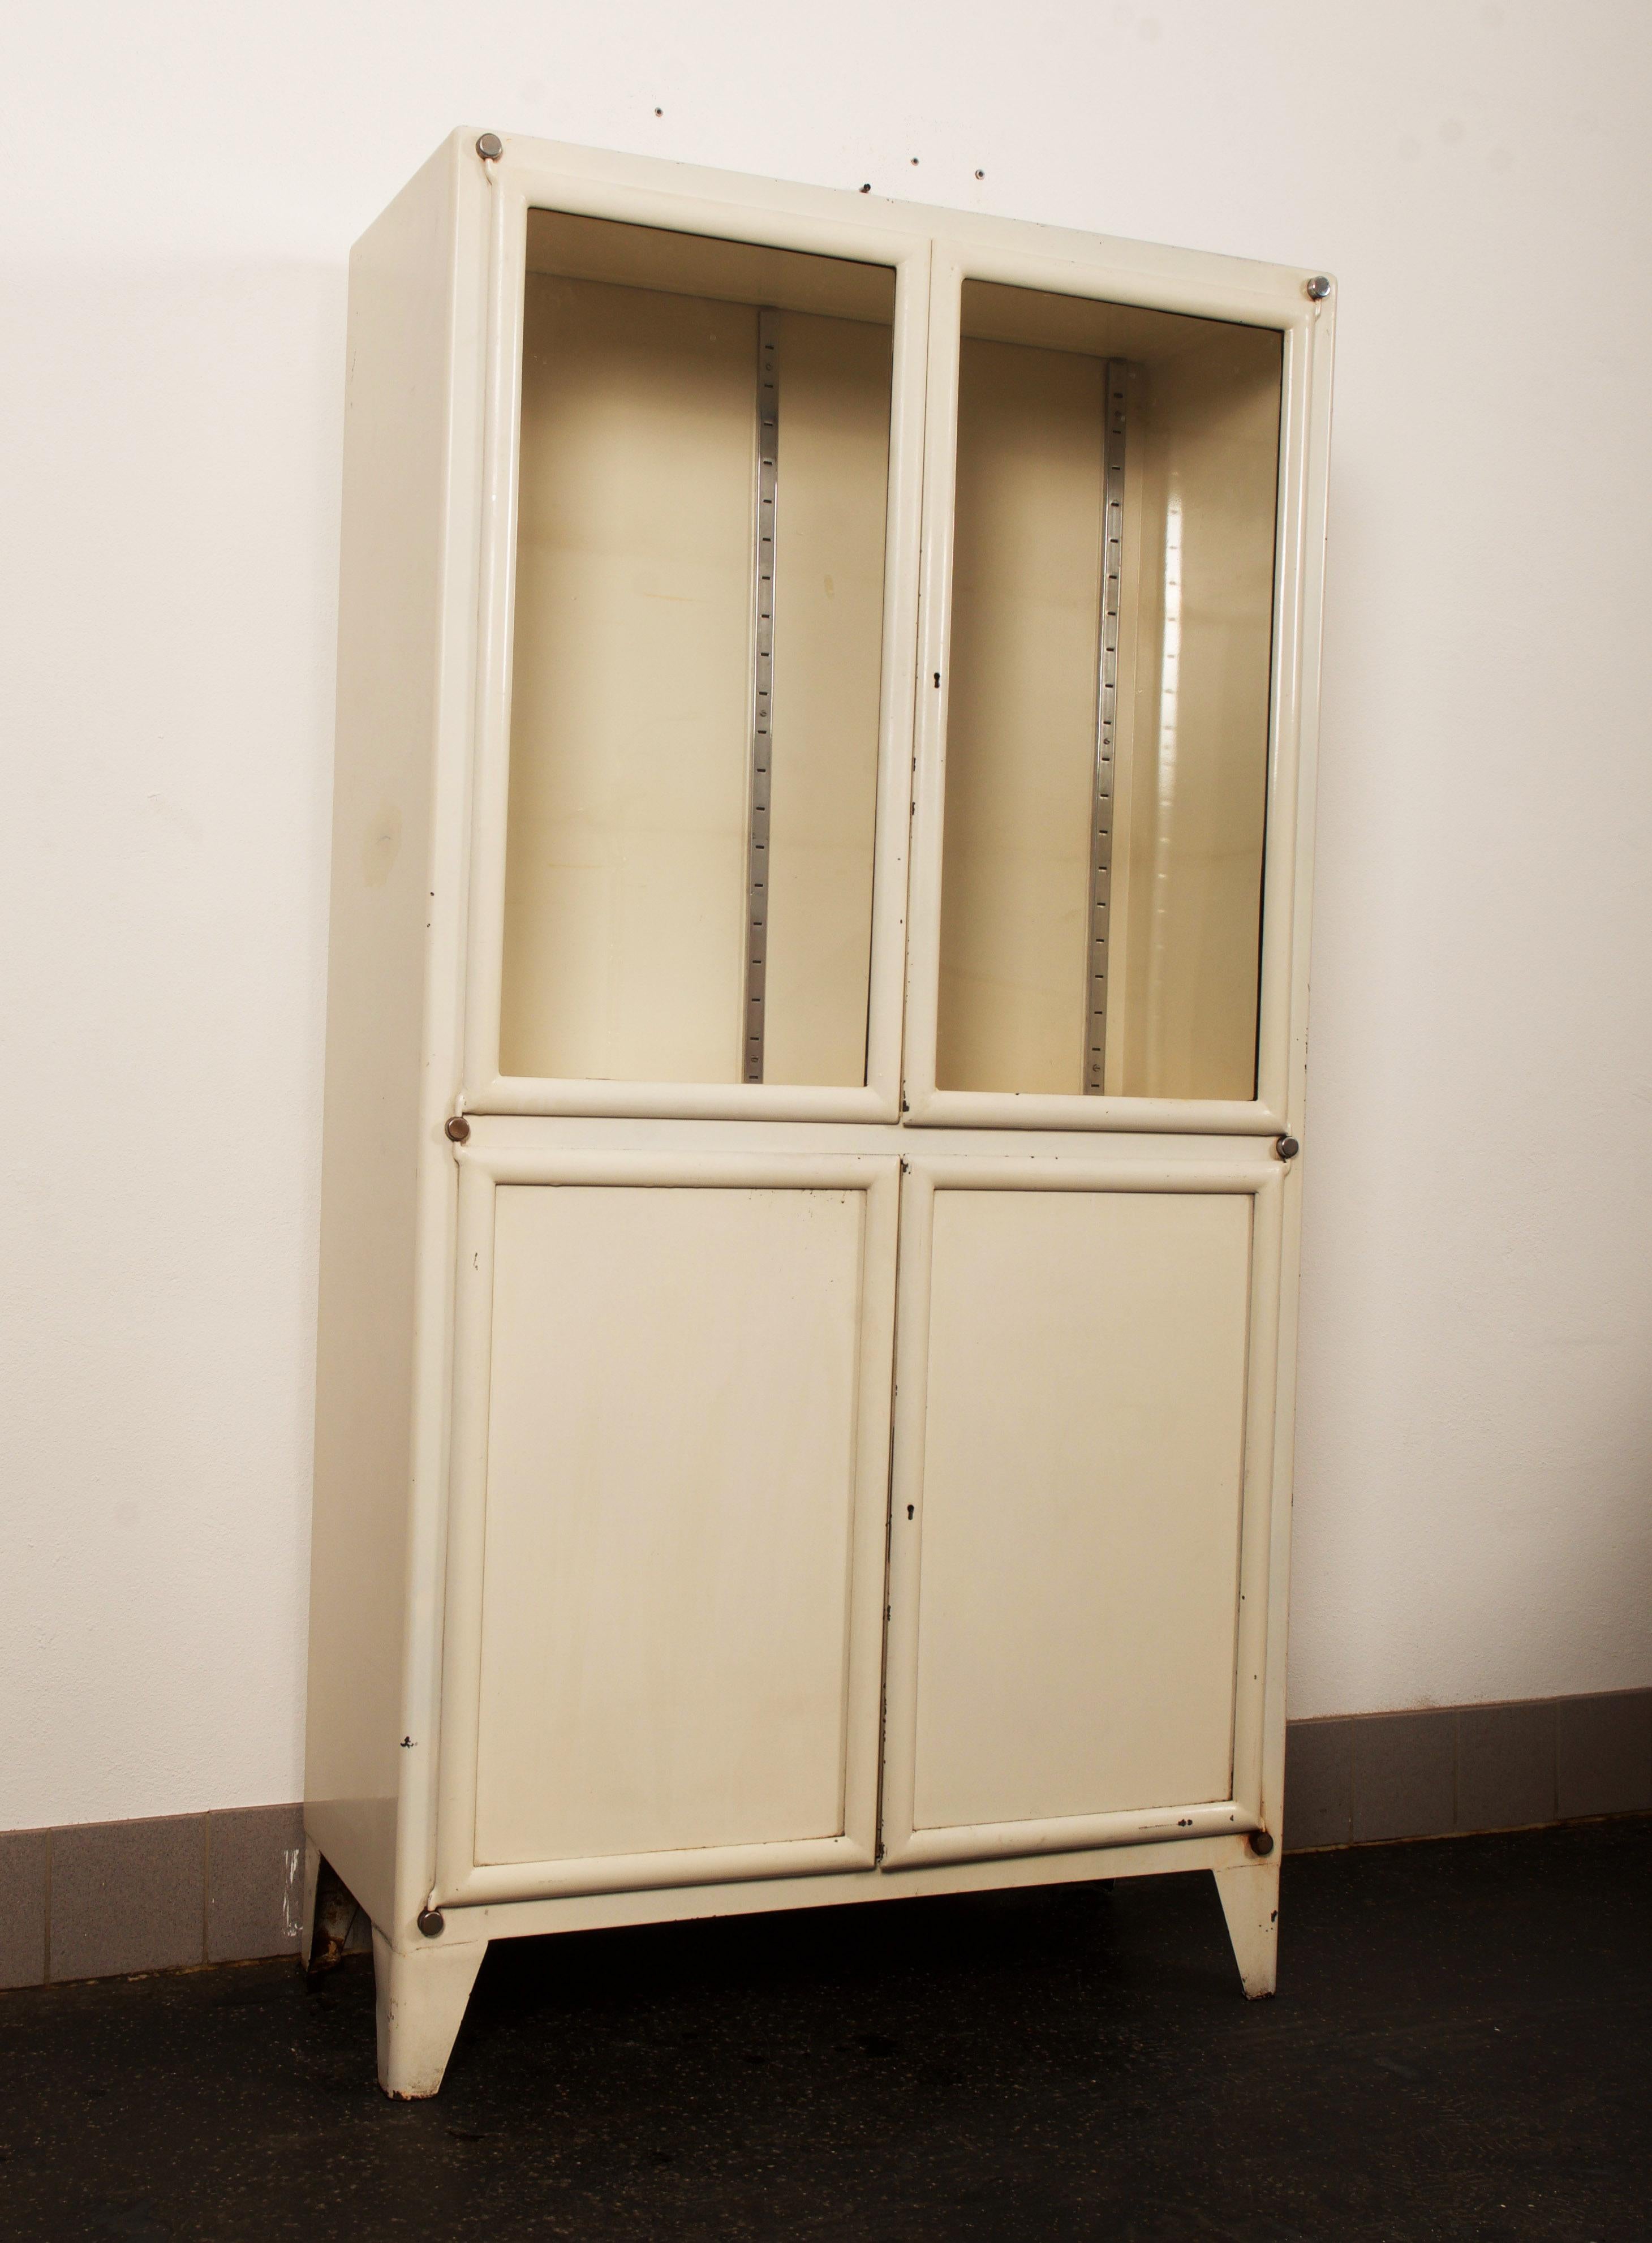 Czech Iron Medical Cabinet By Kovona For Sale